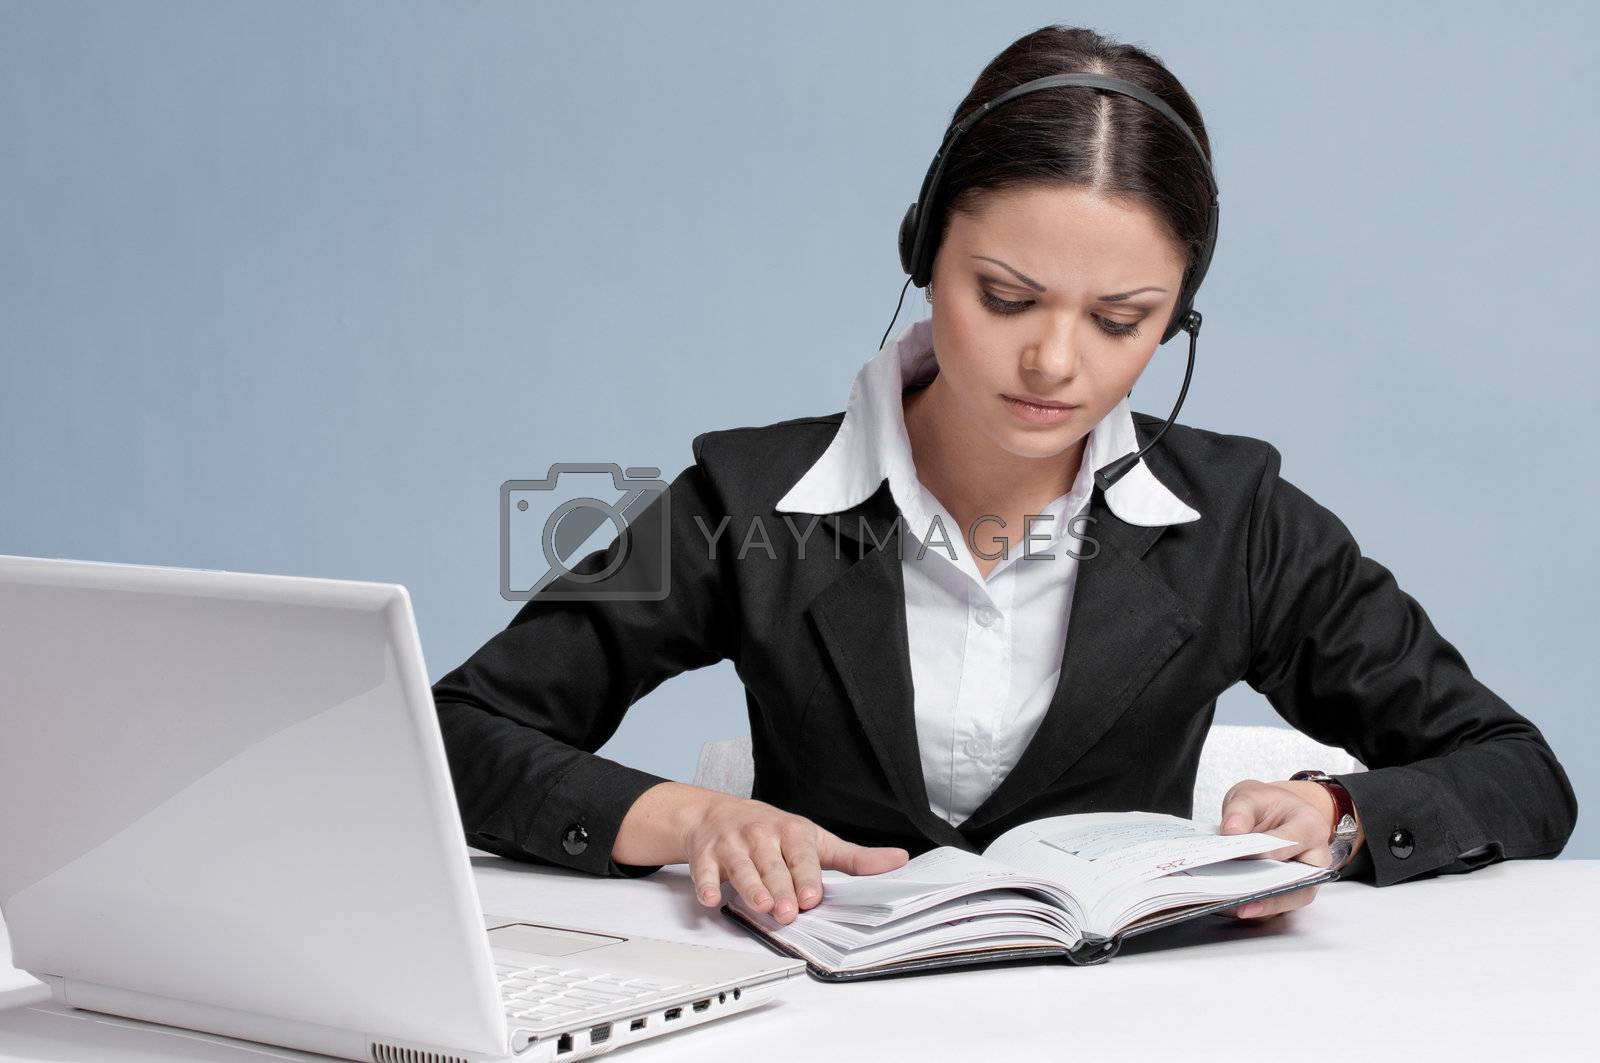 Royalty free image of Business woman with headset communication by markin